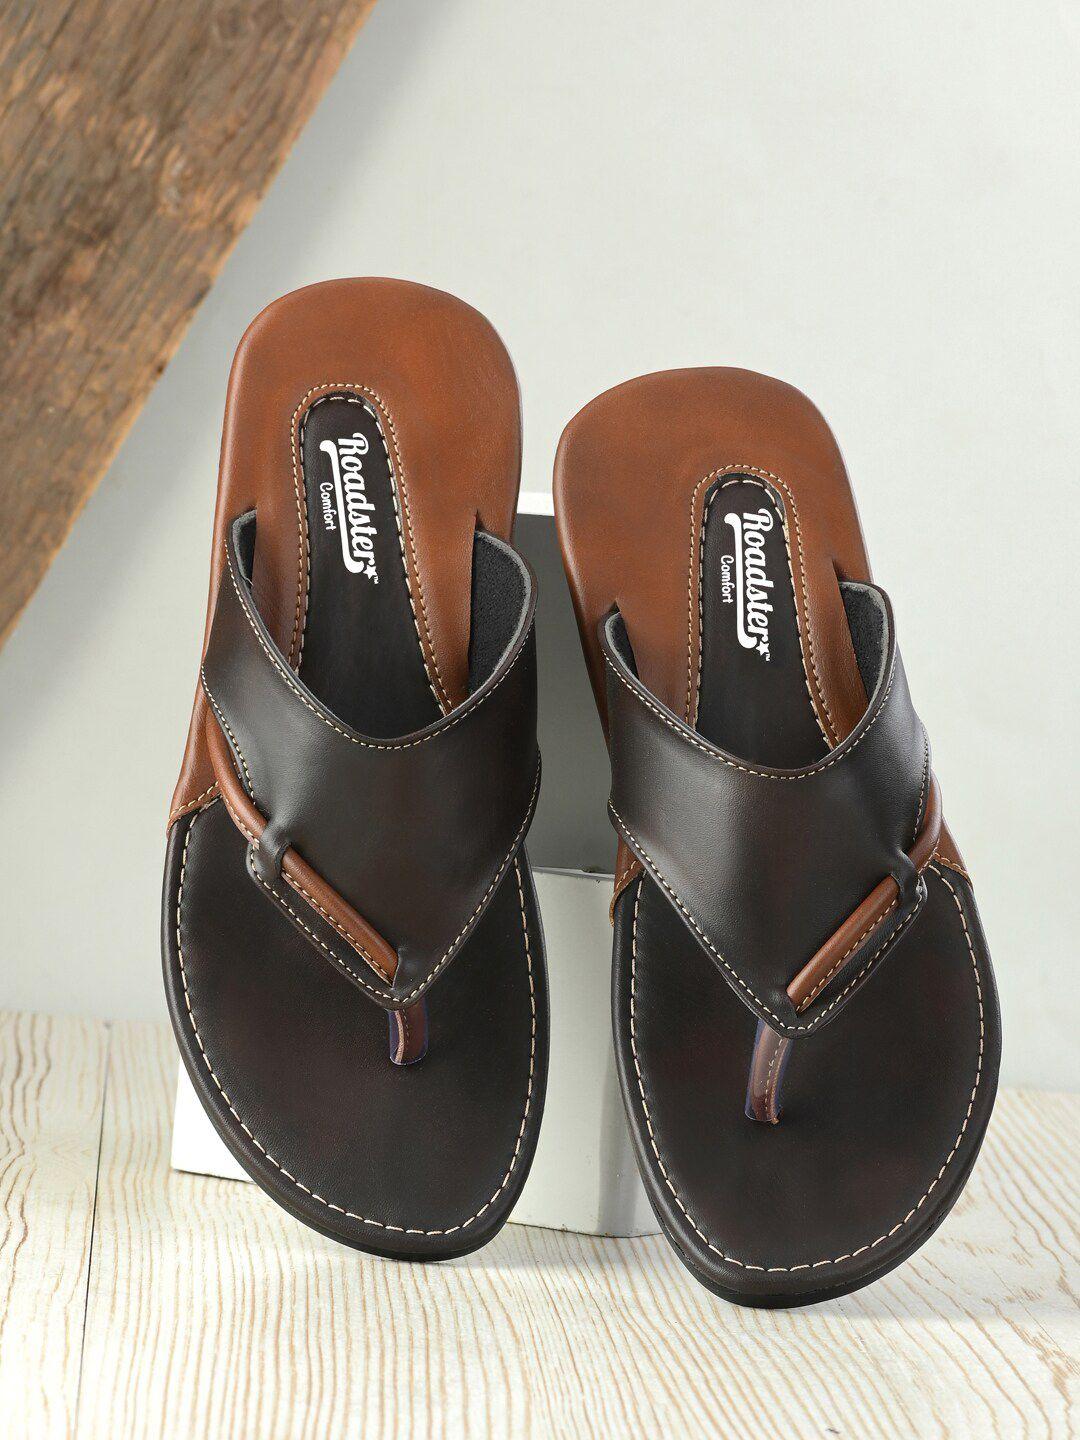 the roadster lifestyle co. men brown textured comfort sandals